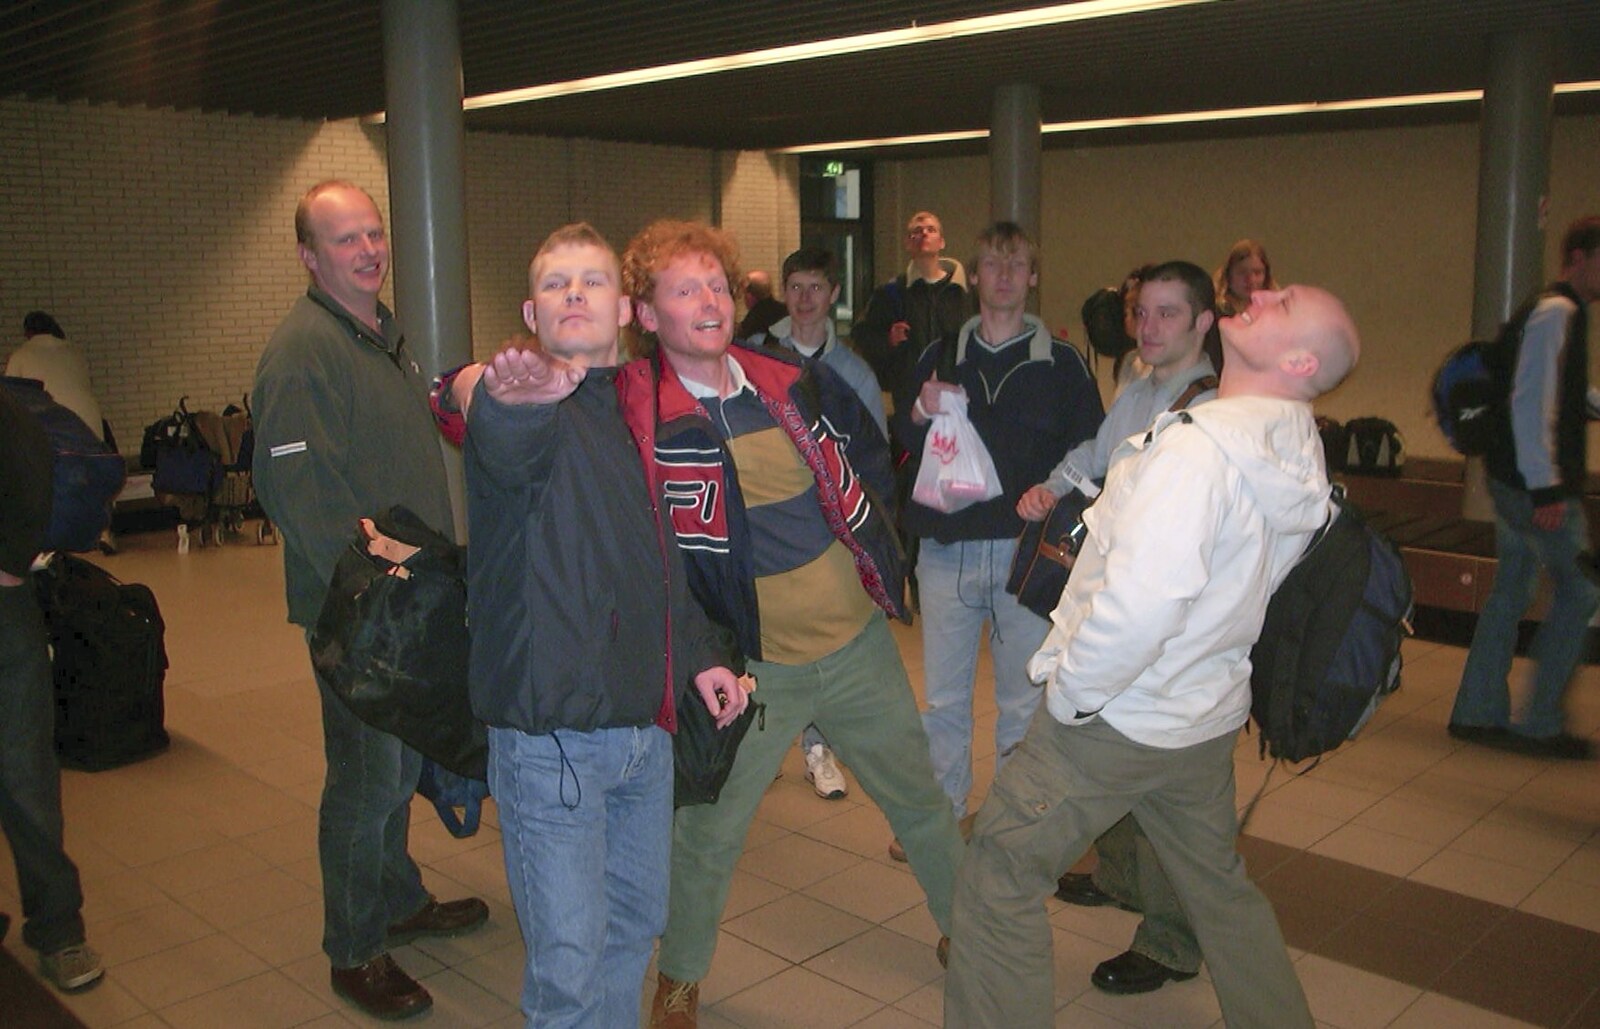 The gang at the Hoek van Holland terminal from Mikey-P's Stag Weekend, Amsterdam, Netherlands - 5th March 2004